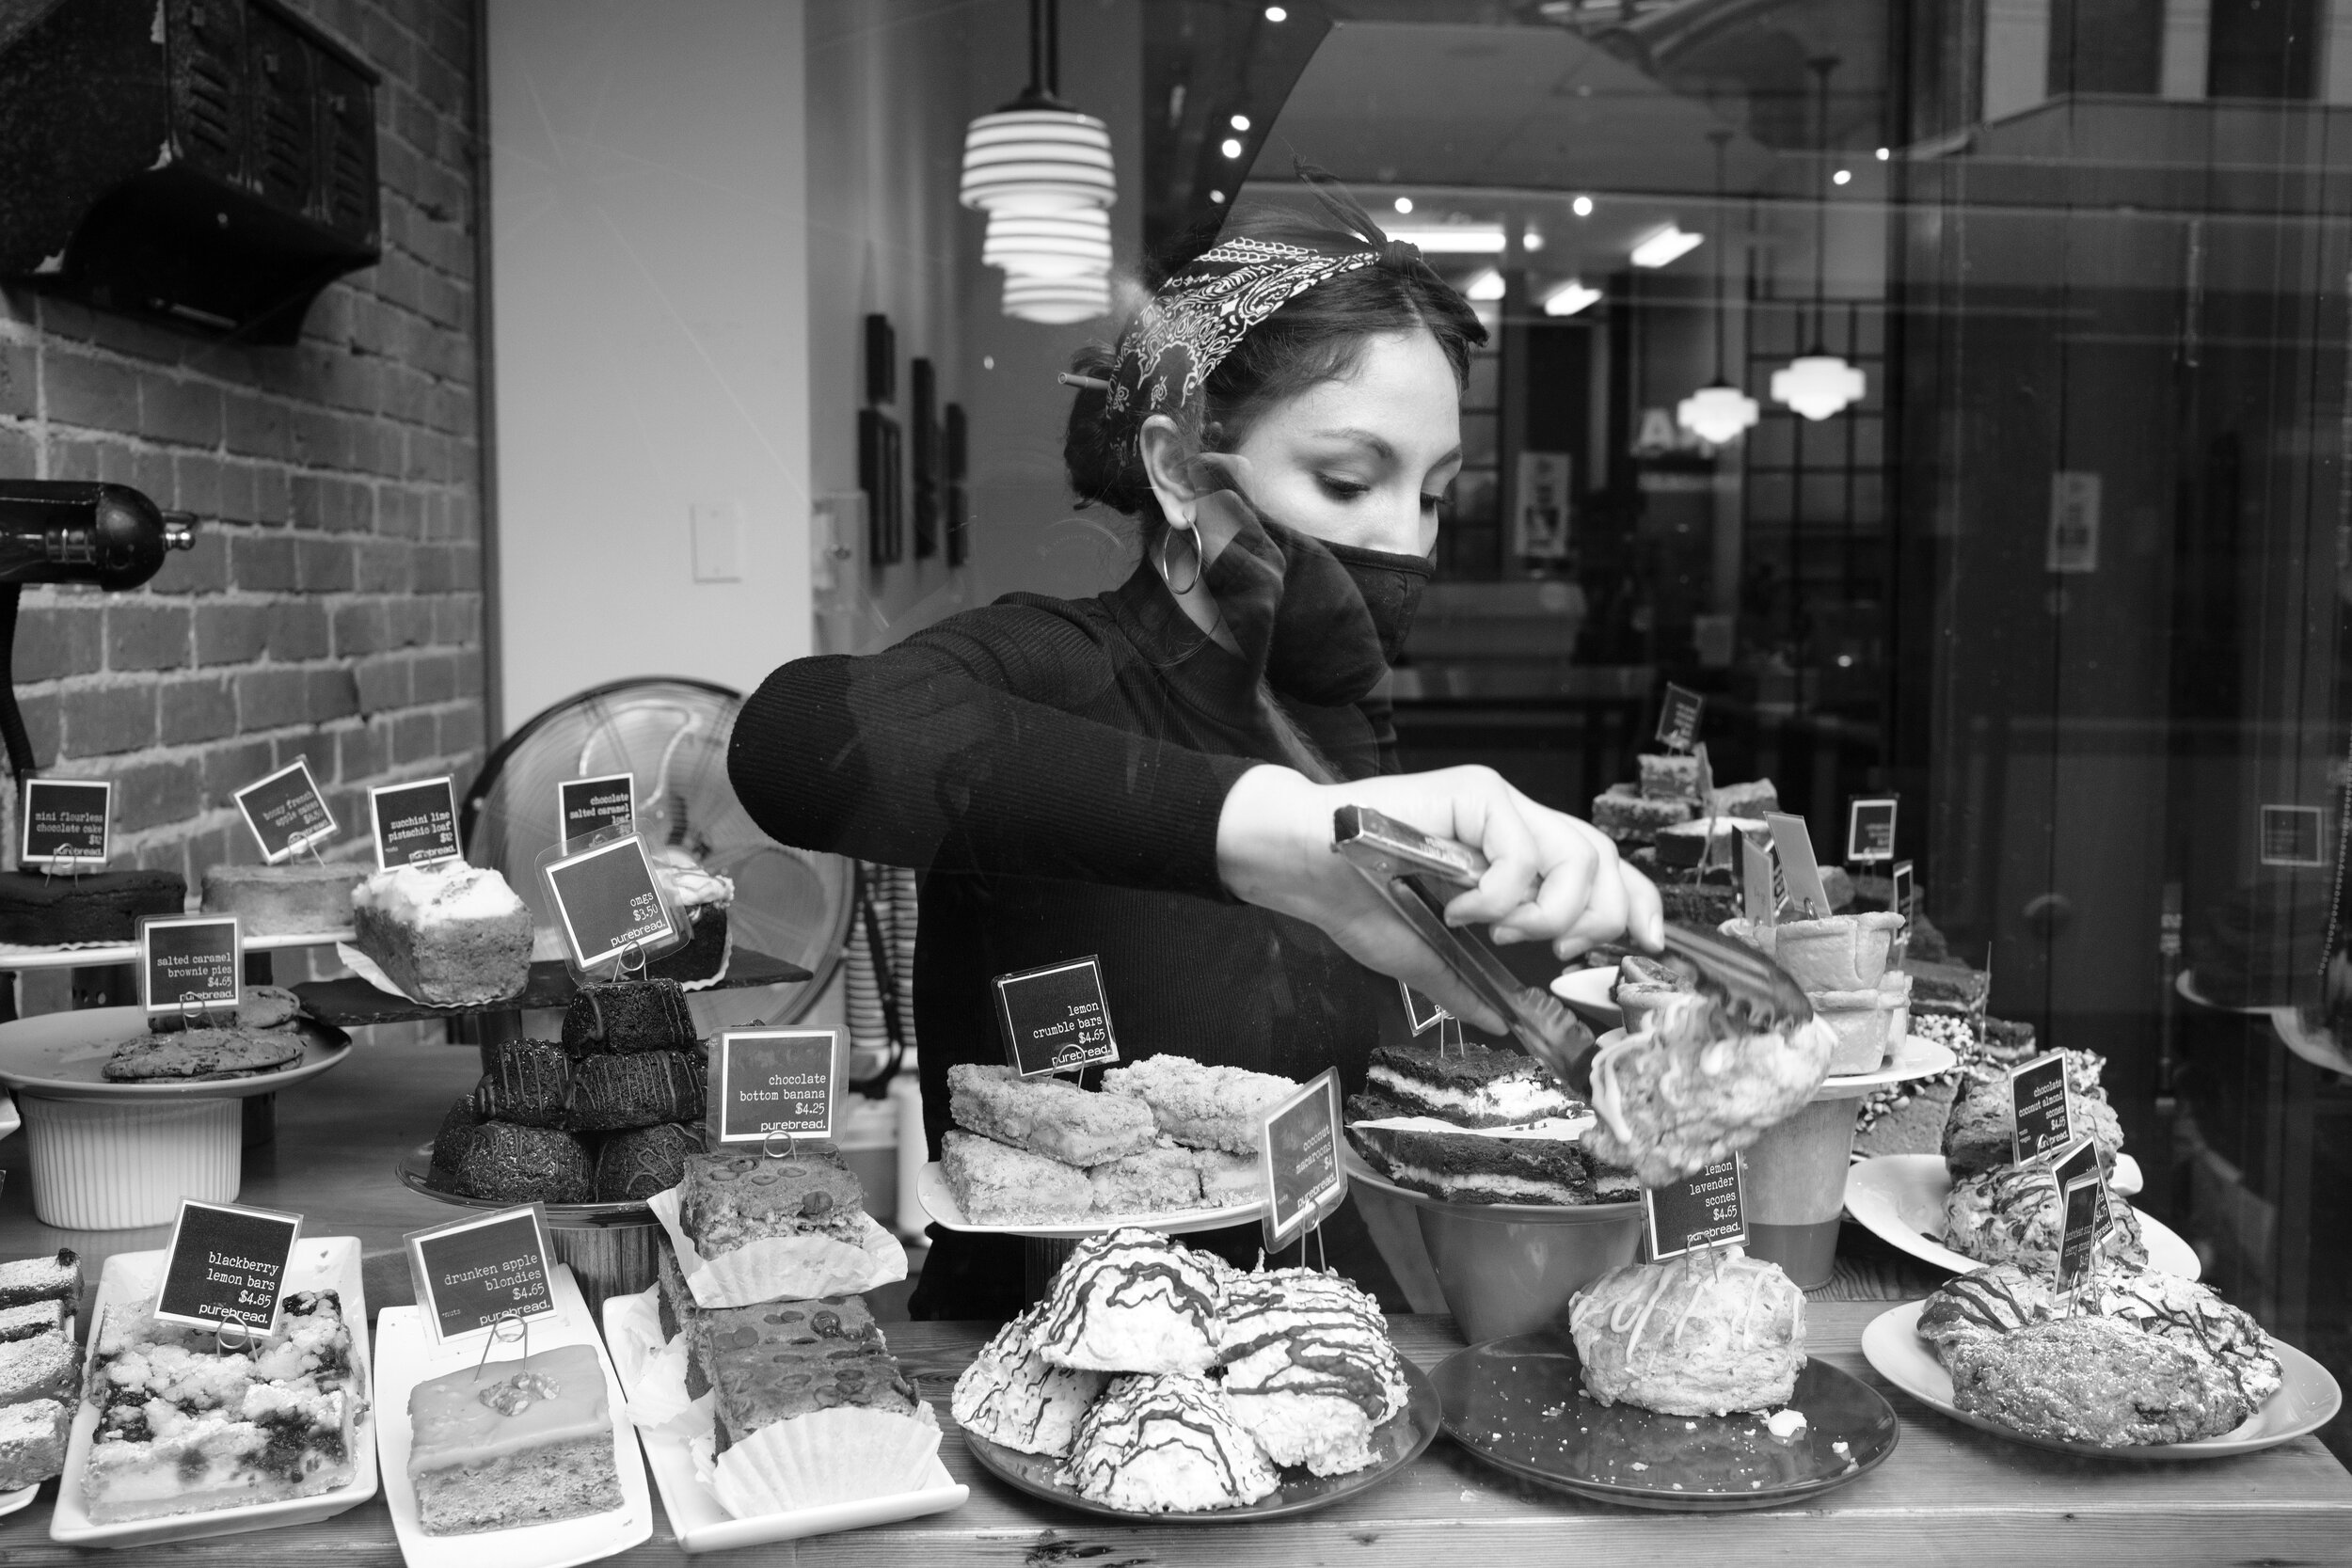 A woman in West Hastings bakery finds a bread for a customer in a window display